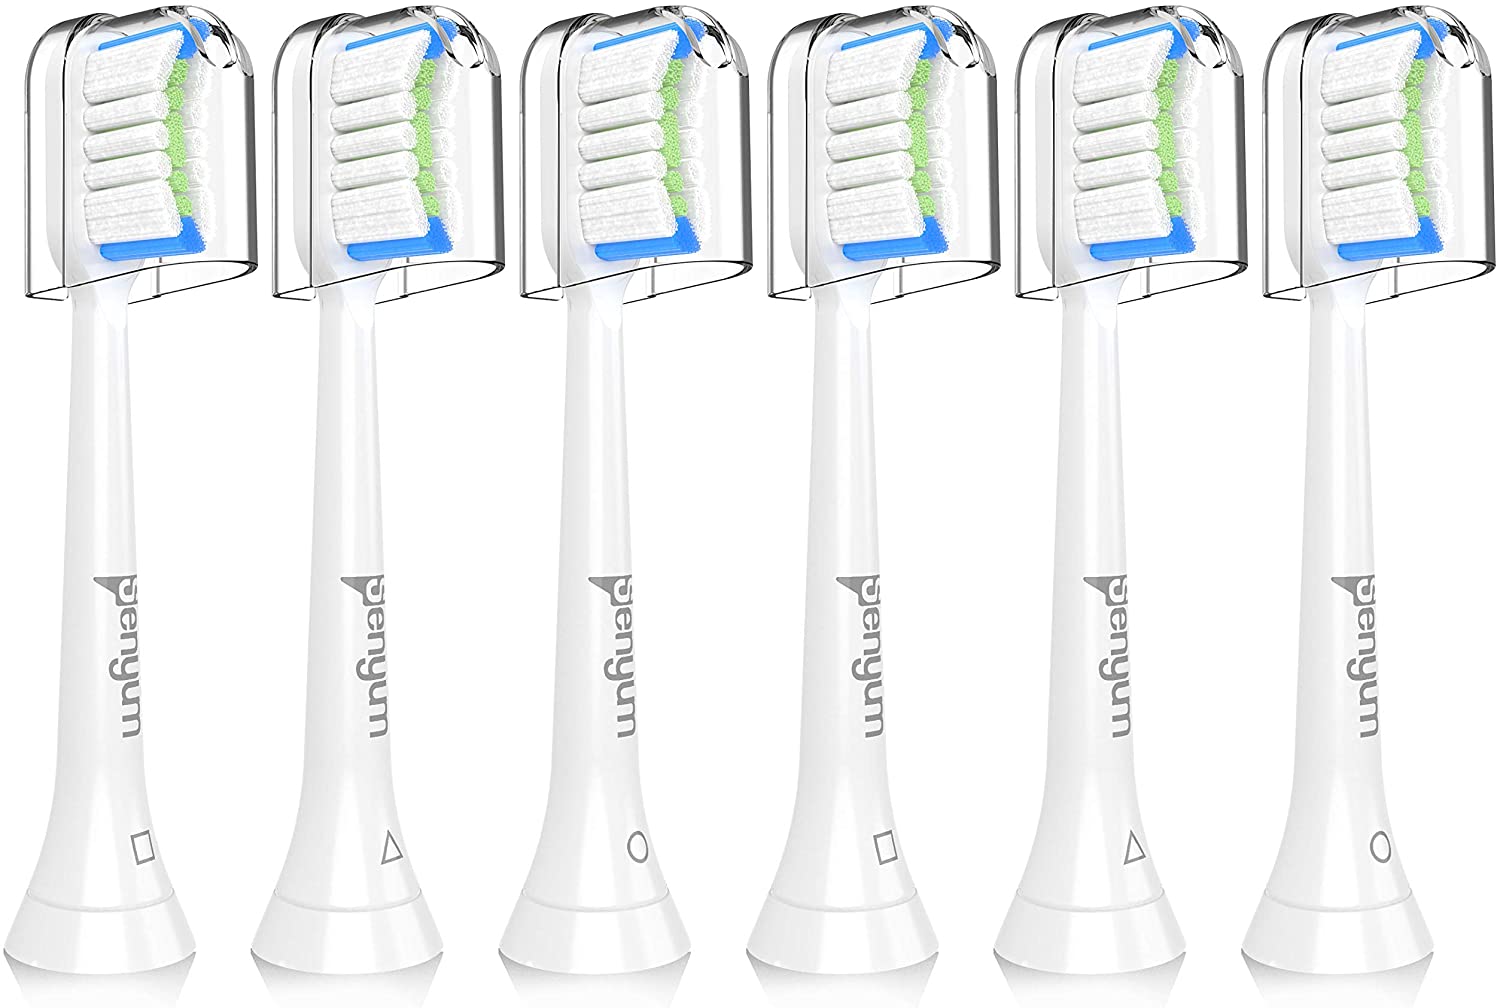 Toothbrush Replacement Heads Compatible with Philips Sonicare DiamondClean EasyClean Gum Health FlexCare HealthyWhite and All Snap-on Electric Brush 6 Pack White $9.99